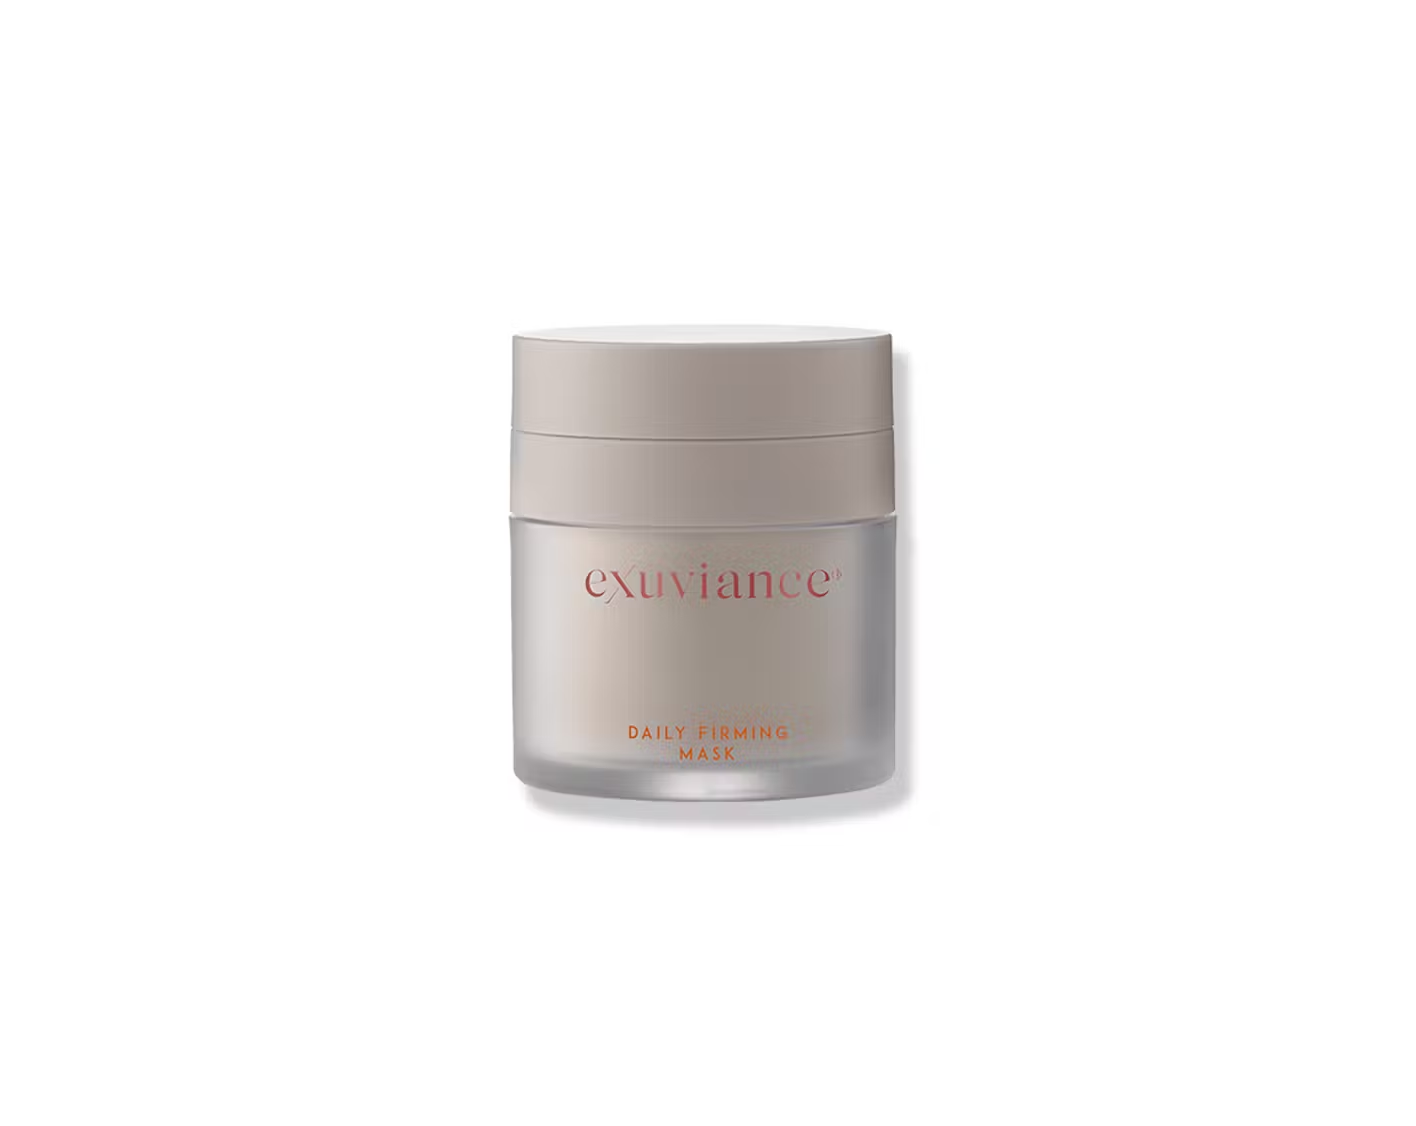 Se Exuviance Daily Firming Mask hos Staybeautiful